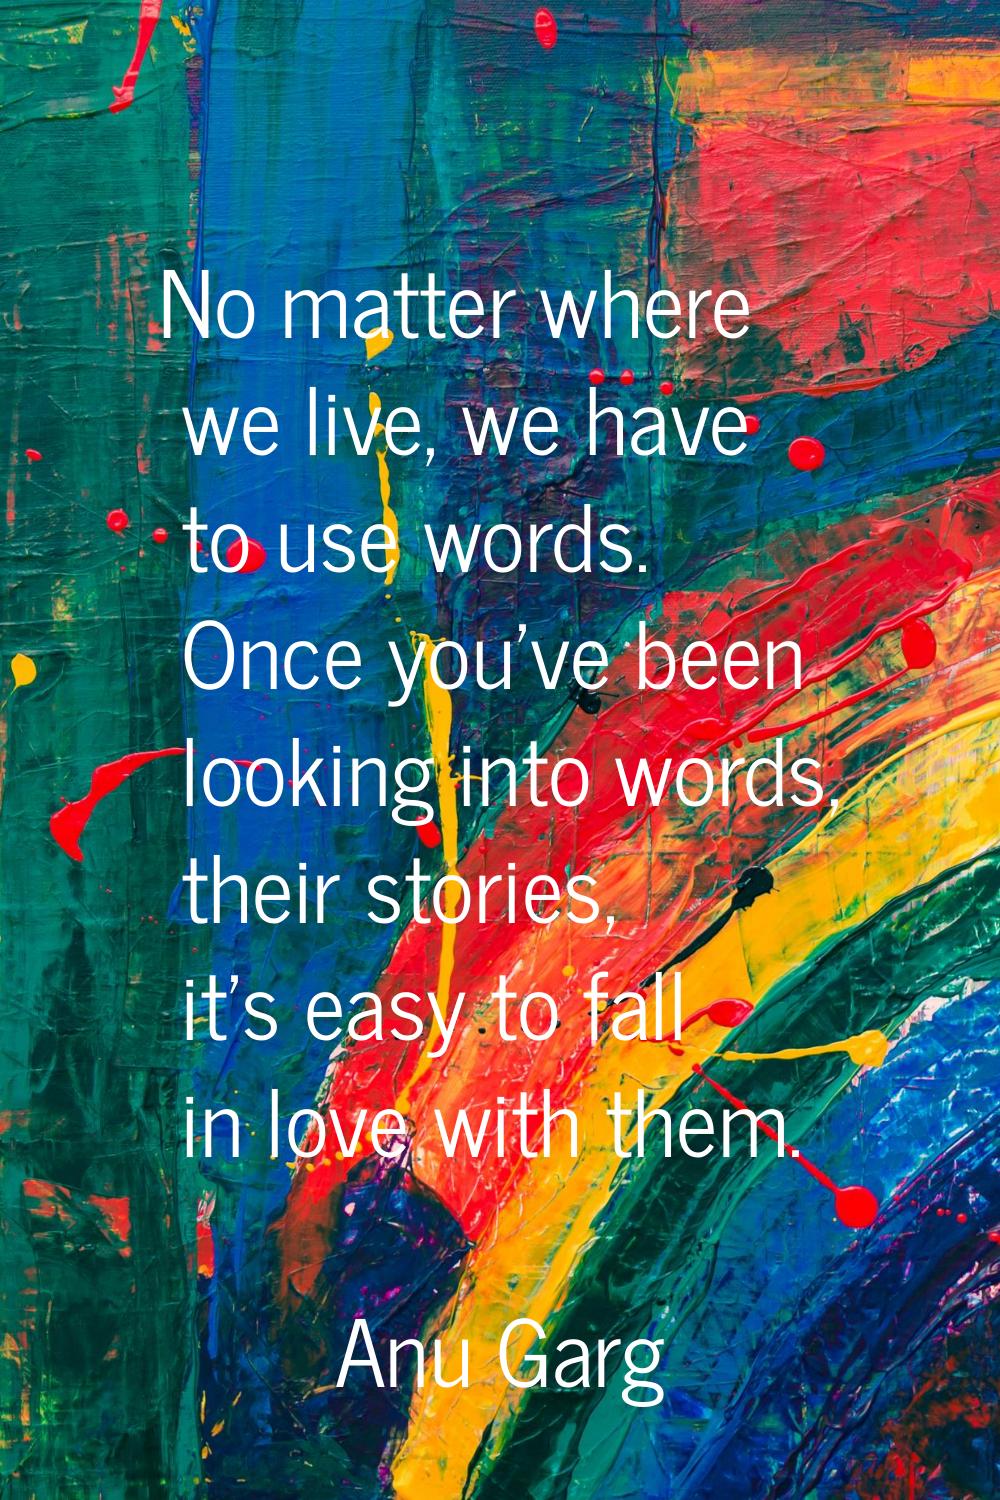 No matter where we live, we have to use words. Once you've been looking into words, their stories, 